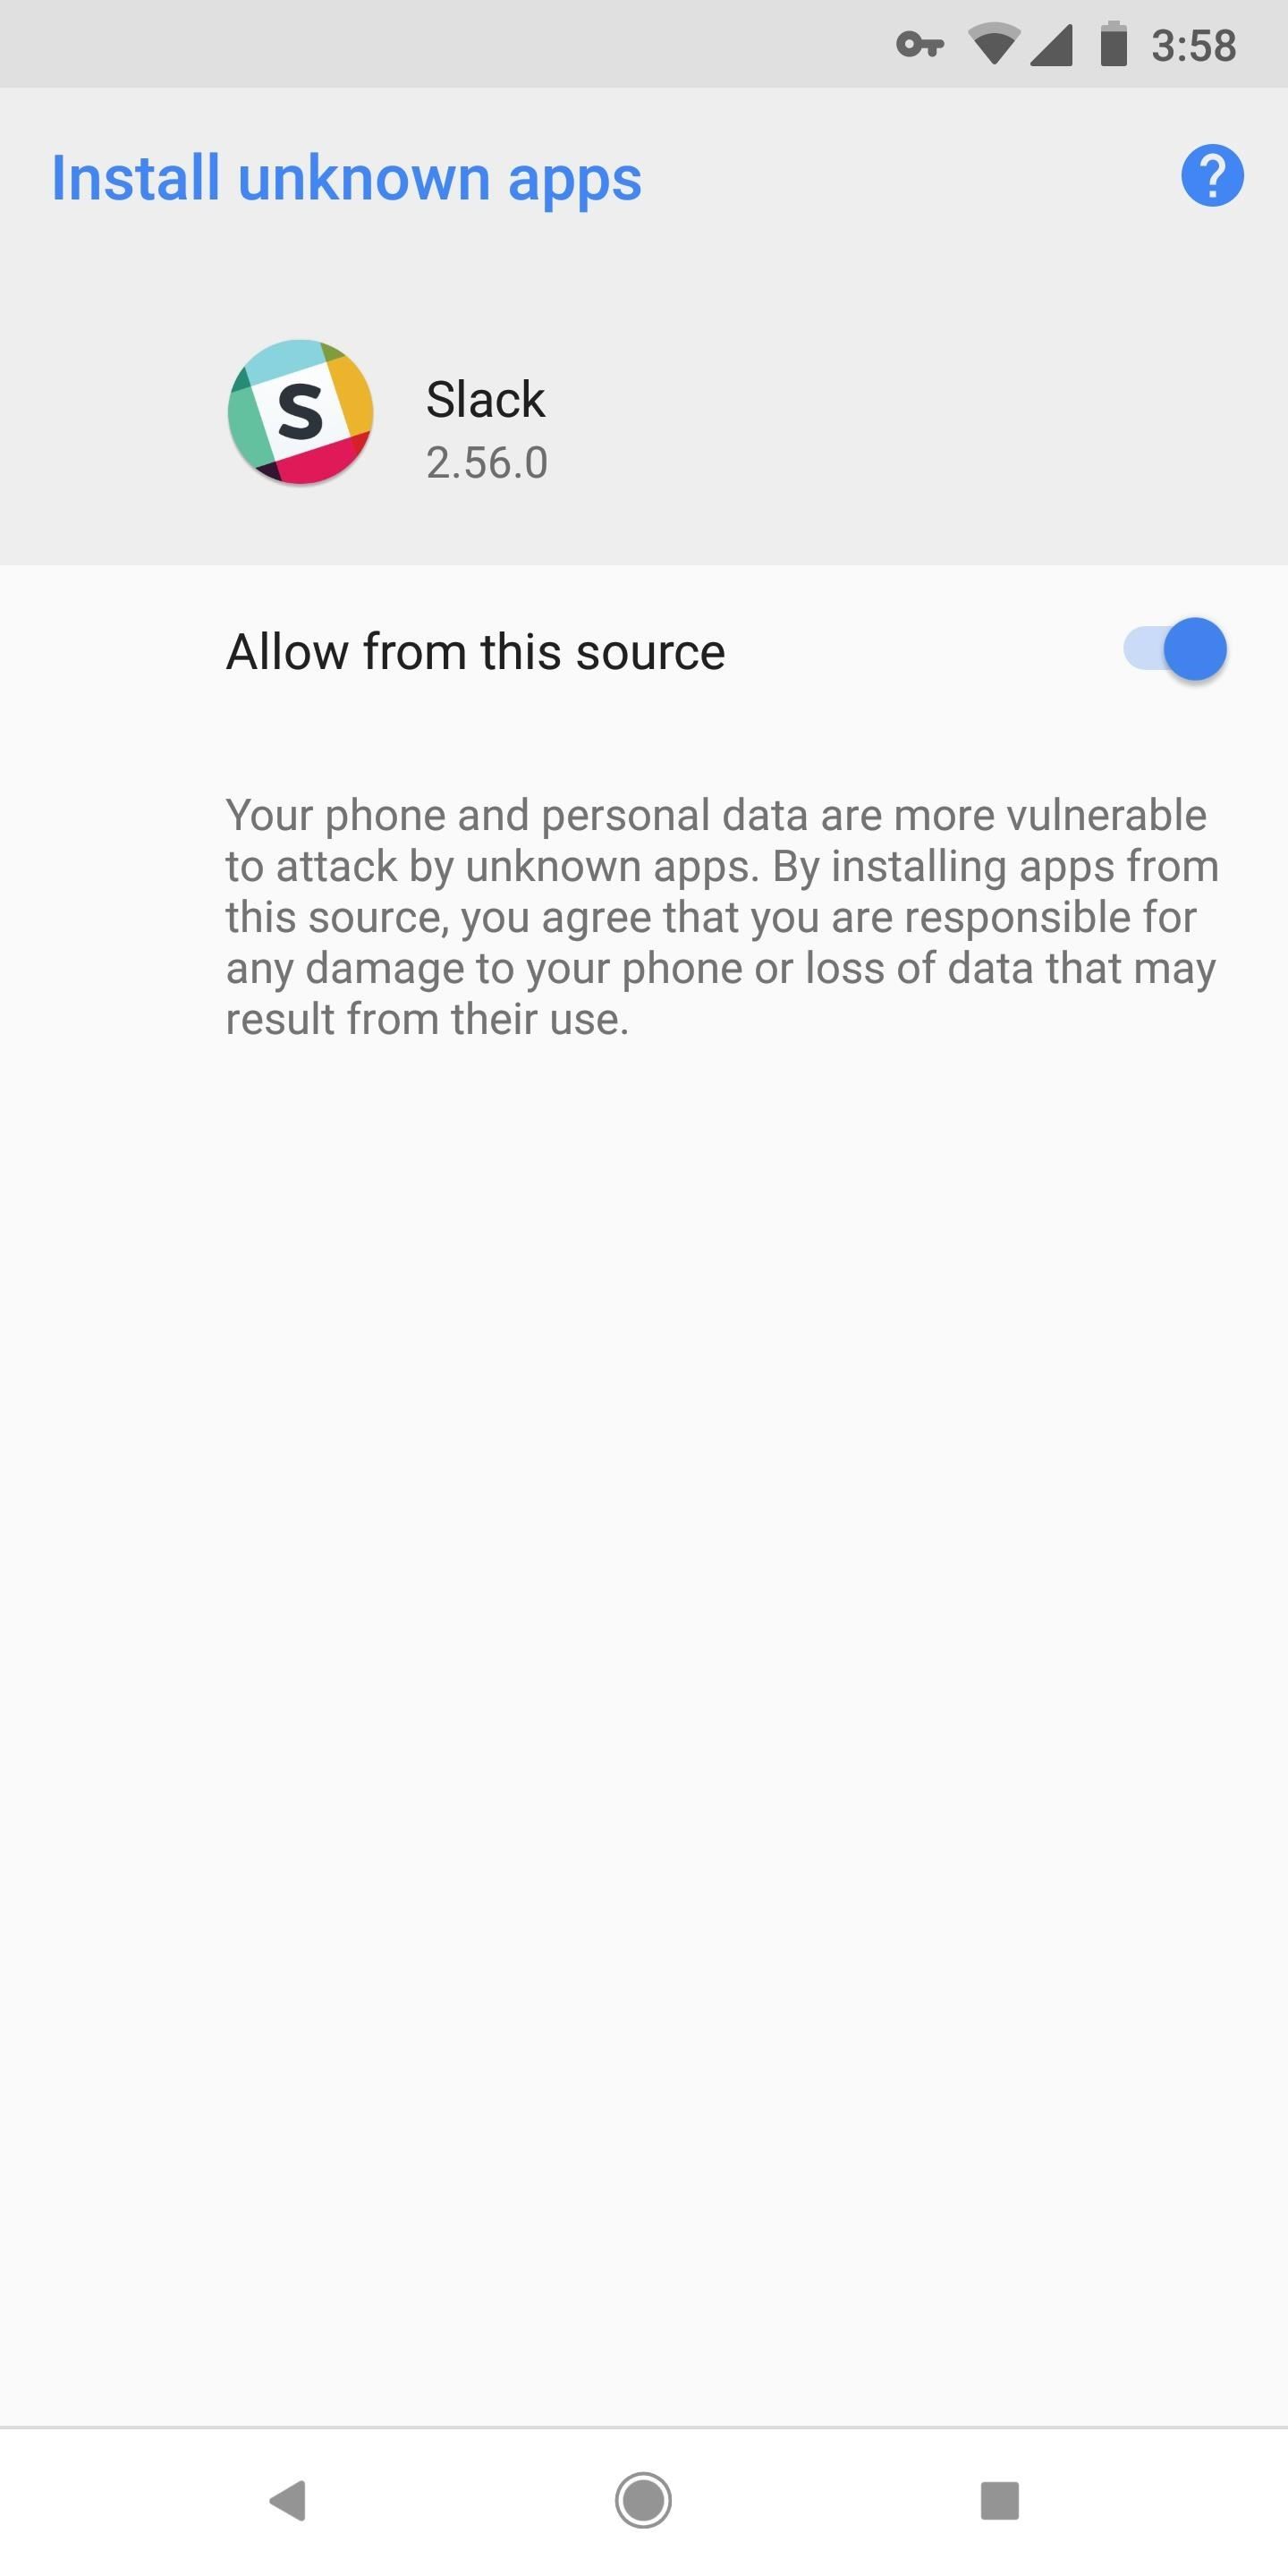 Android 101: How to Sideload Apps by Enabling 'Unknown Sources' or 'Install Unknown Apps'